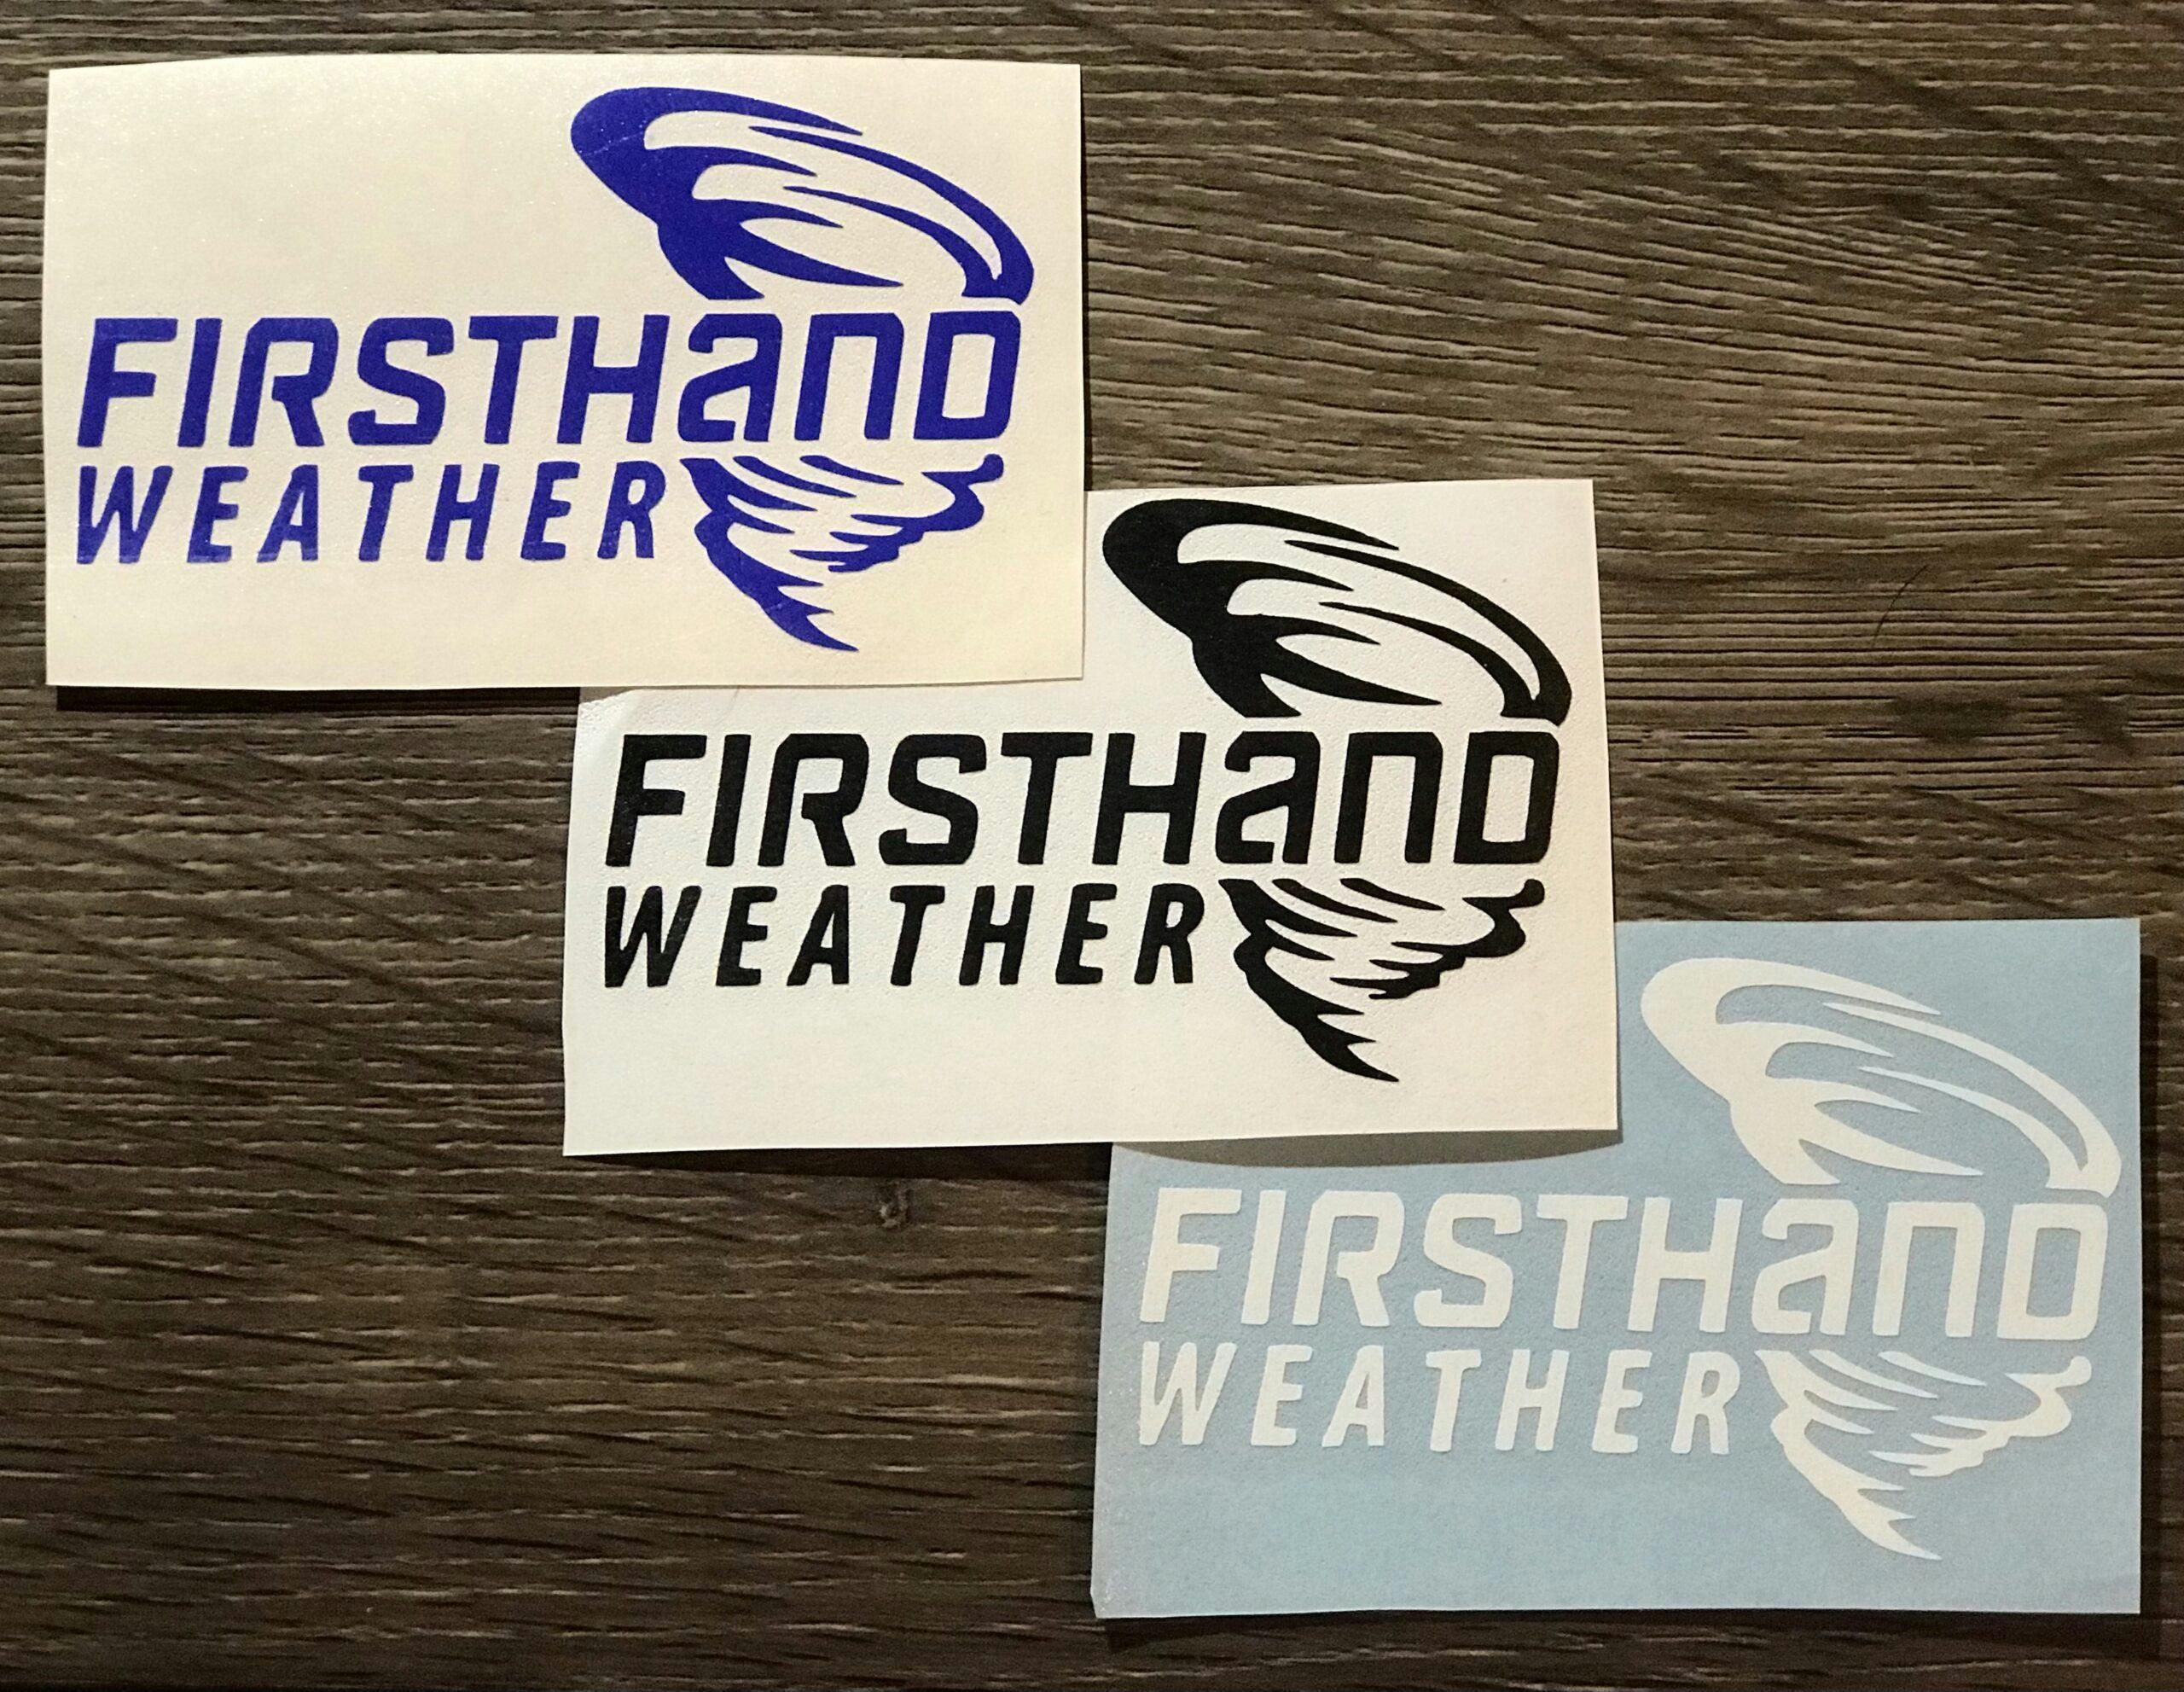 Firsthand Weather decals